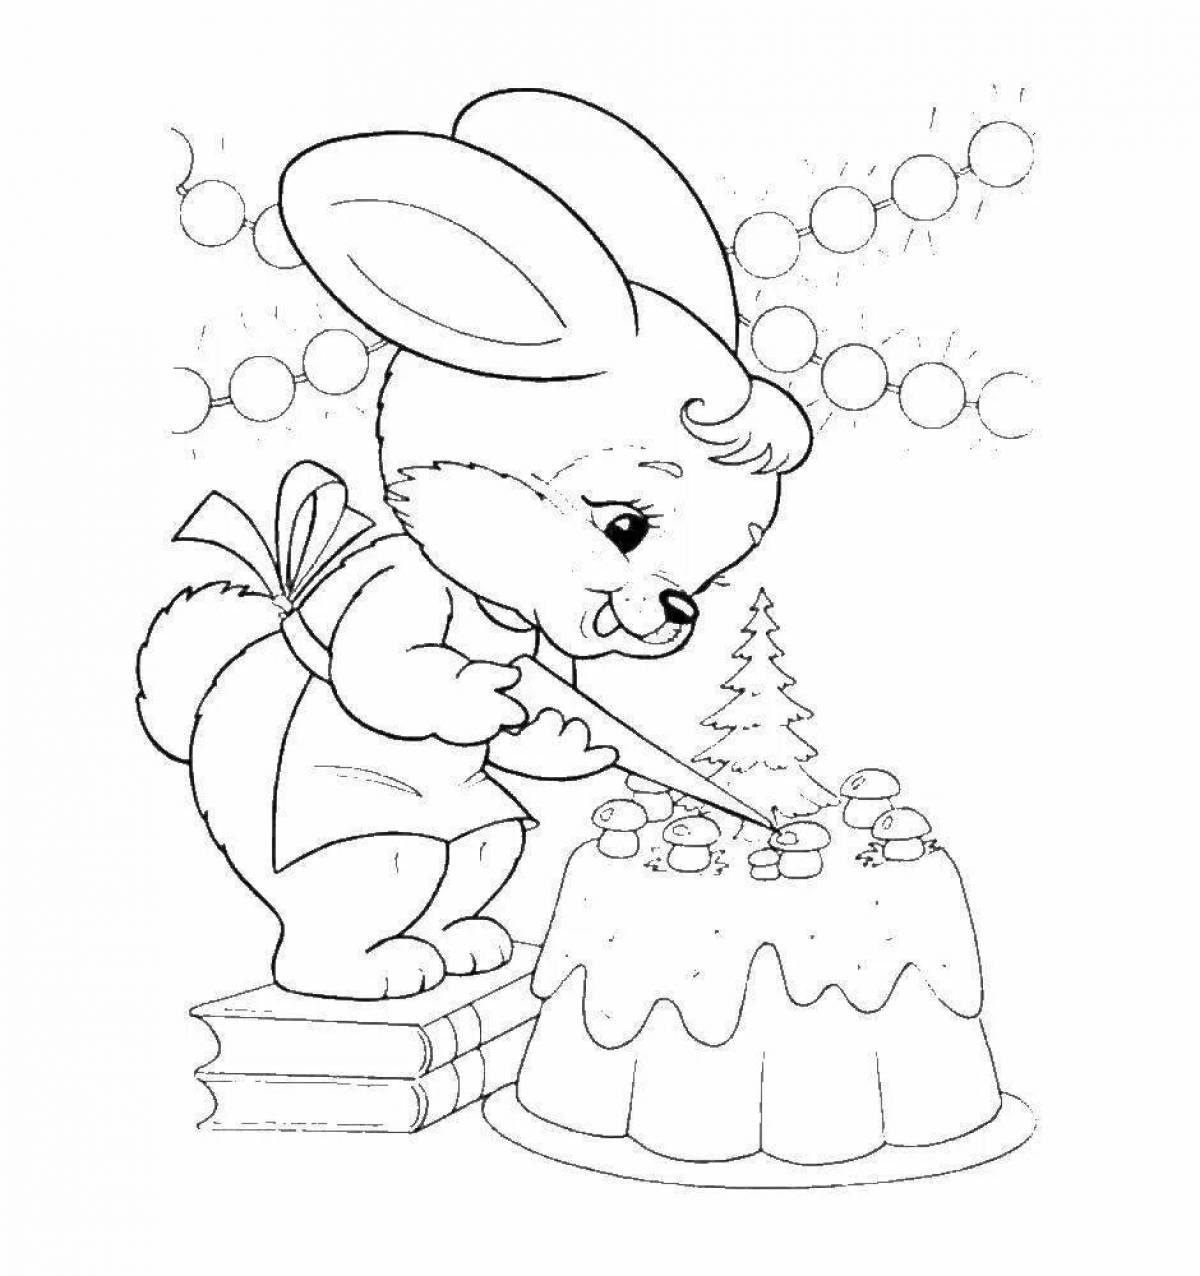 Funny Christmas rabbit coloring book